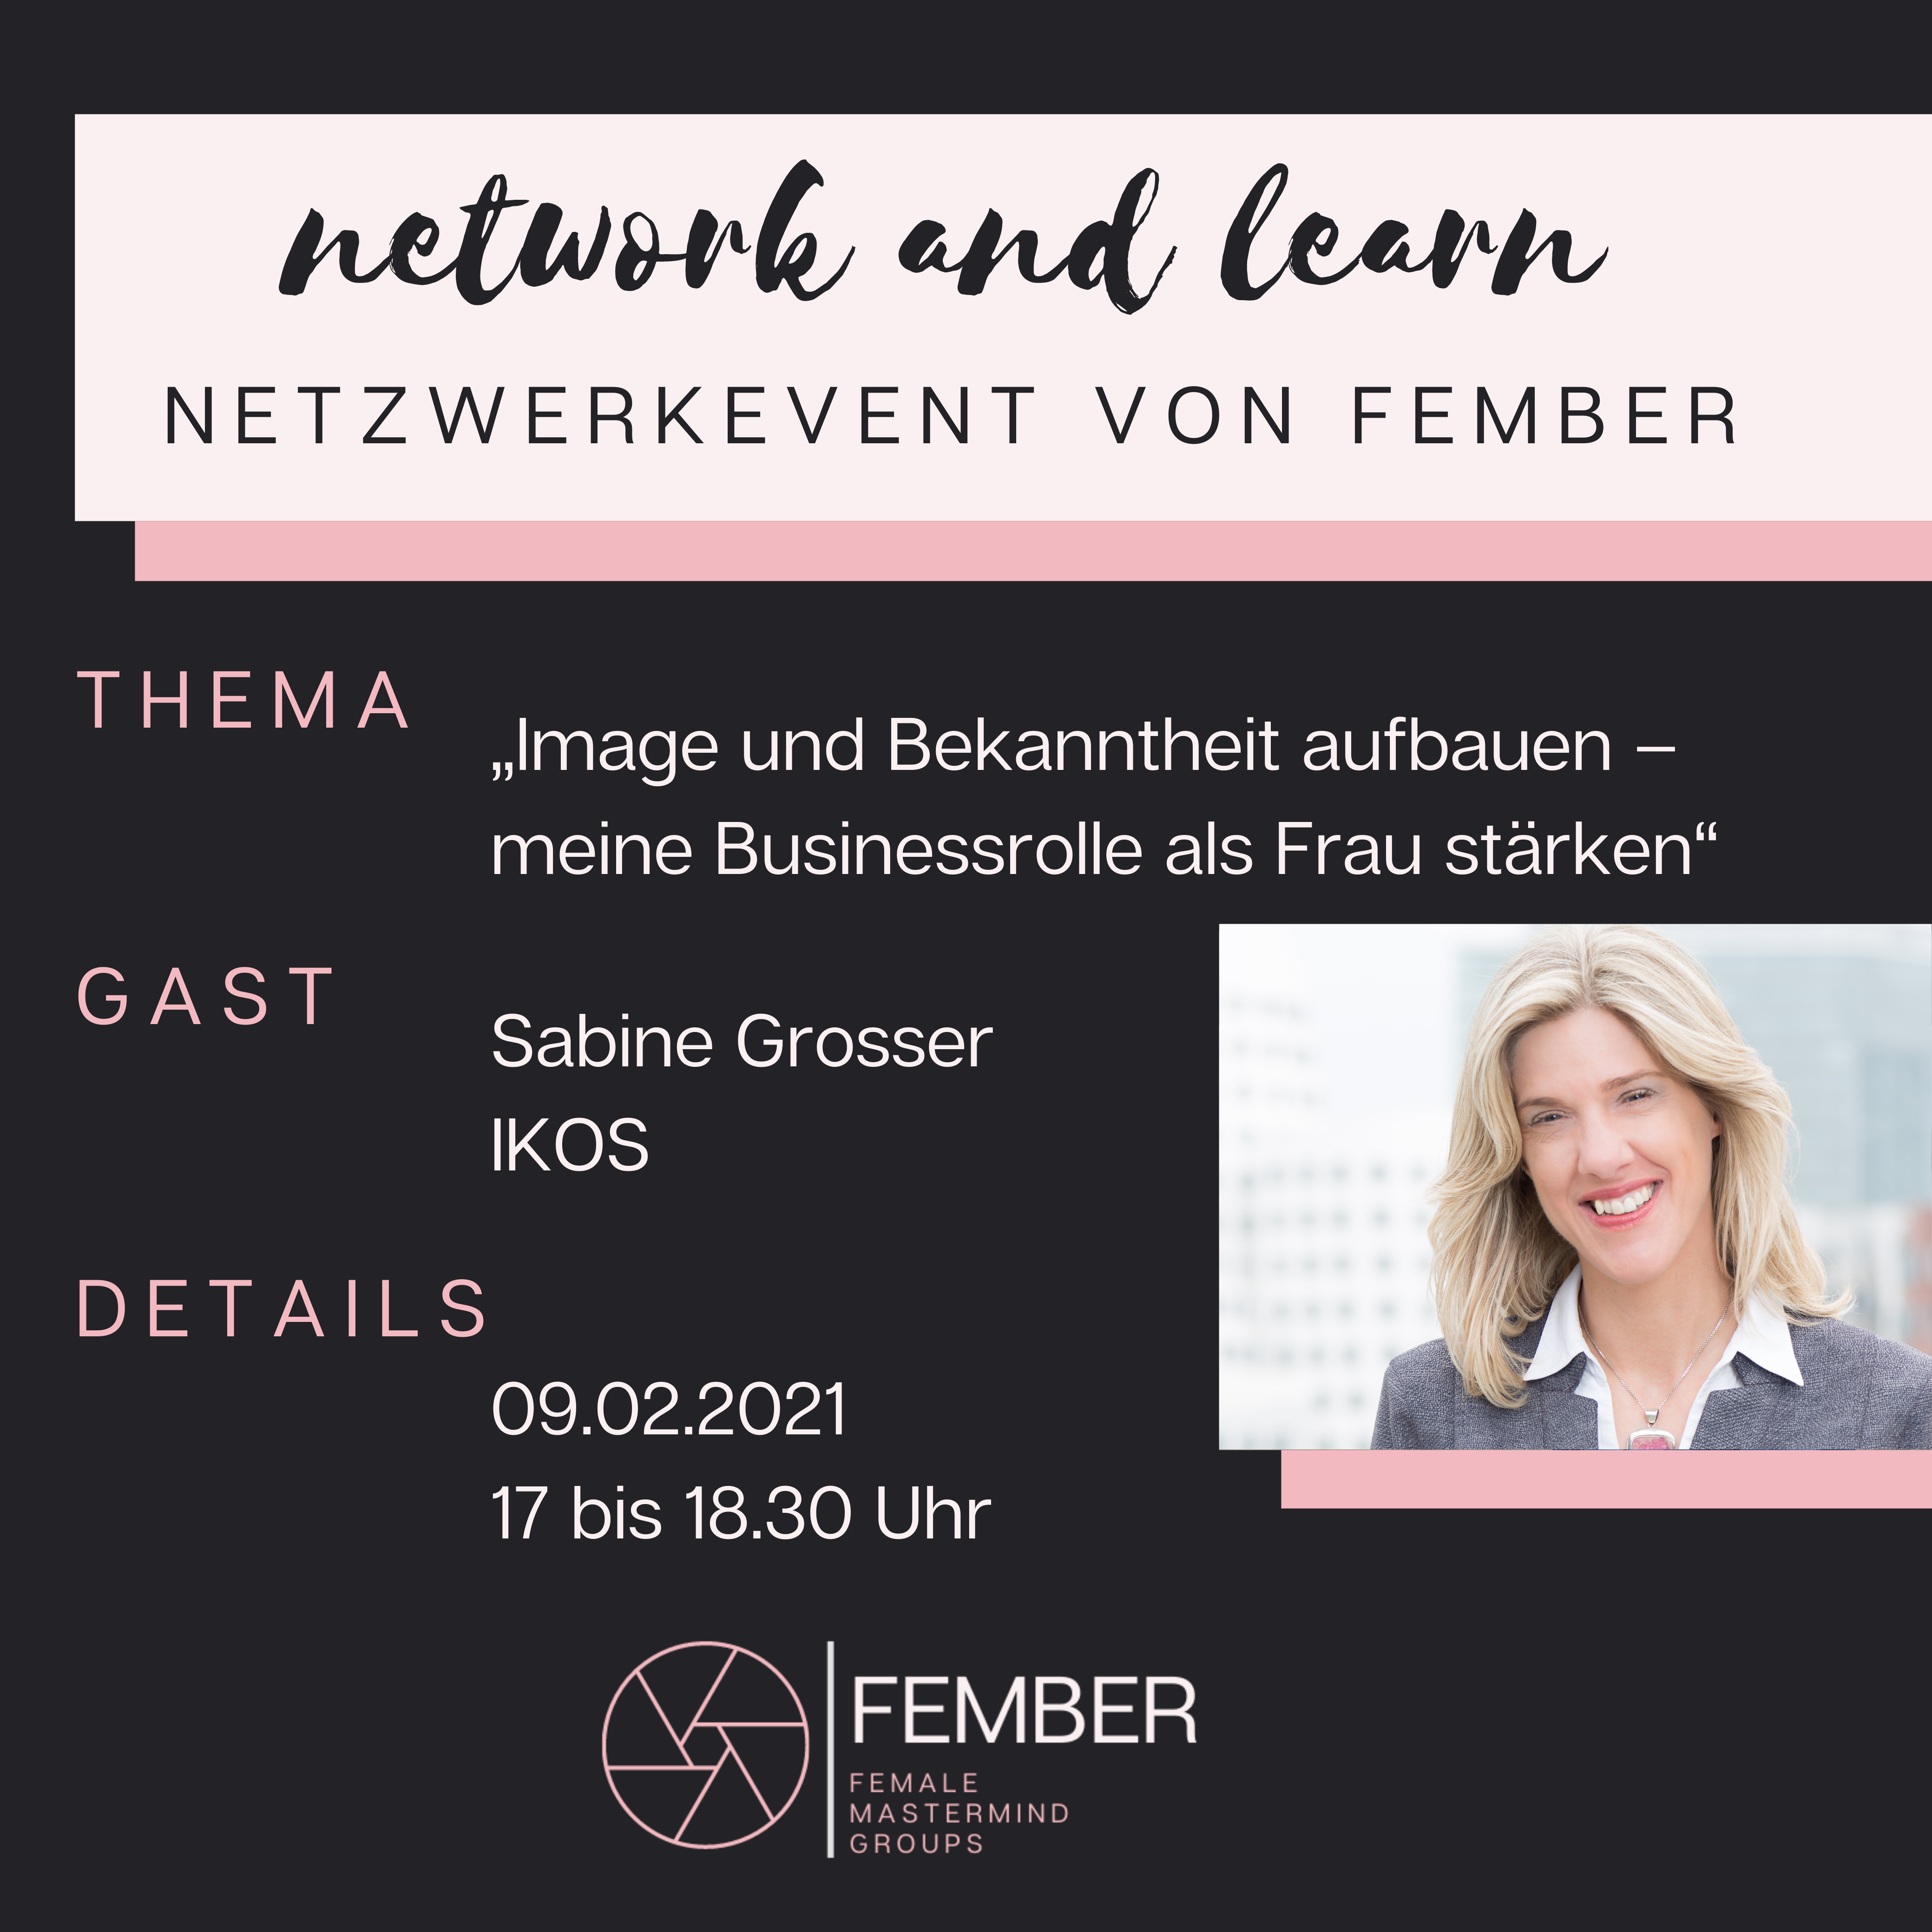 NETWORK & LEARN Events